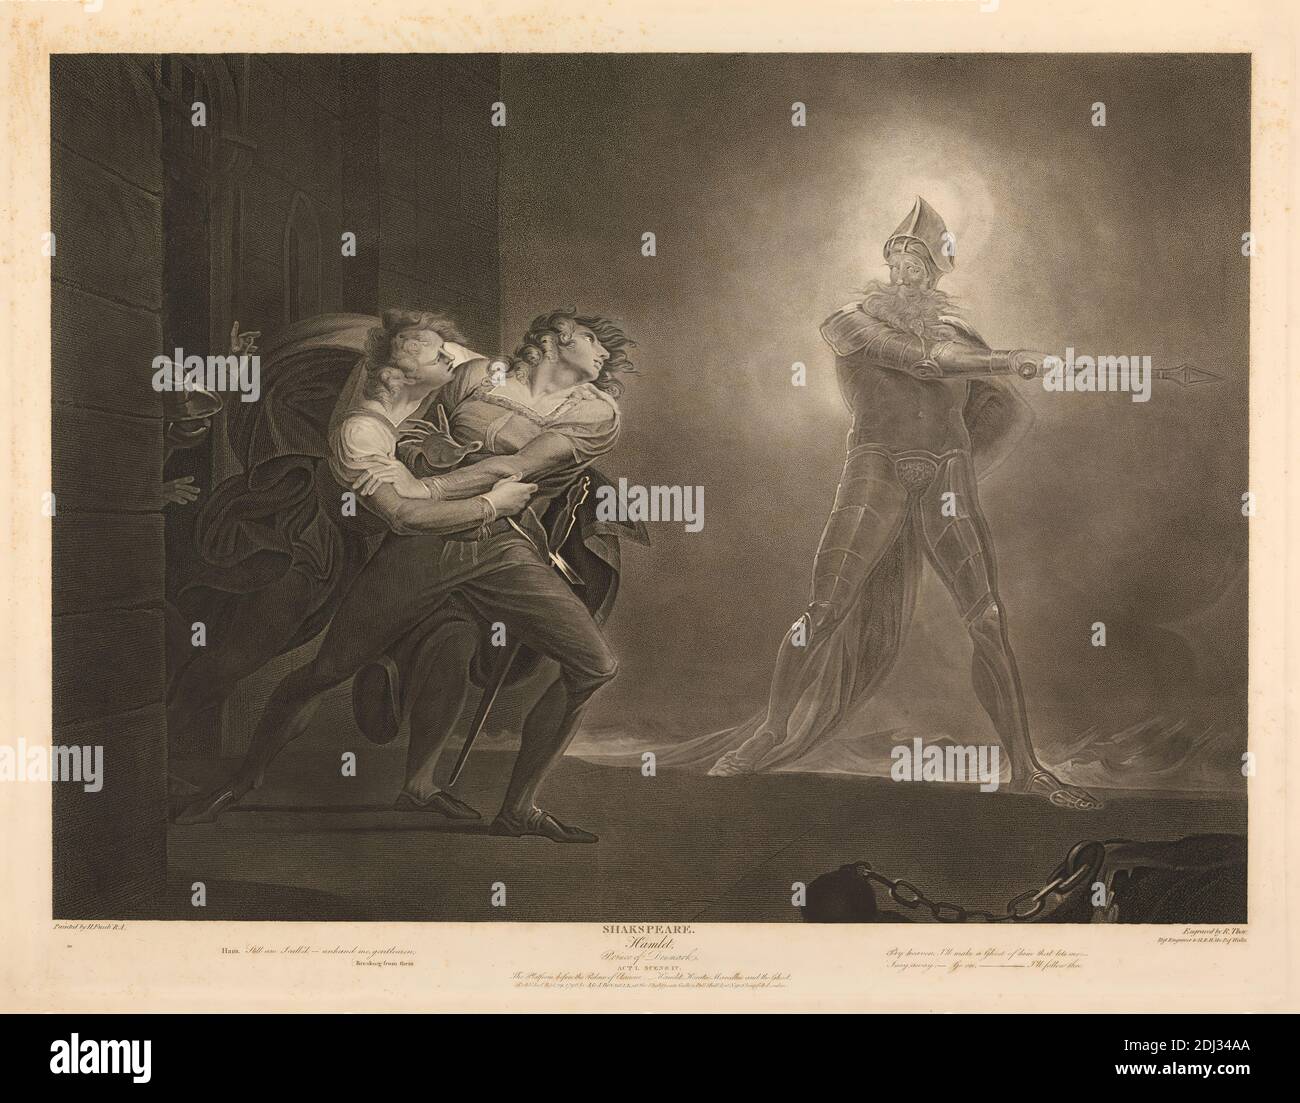 Hamlet, Prince of Denmark: Act I, Scene iv, Platform before the Palace of Elsineur--Hamlet, Horatio, Marcellus and the Ghost, Robert Thew, 1758–1802, British, after Henry Fuseli, 1741–1825, Swiss, active in Britain (1766–70; 1779 on), 1803, Engraving, Sheet: 17 x 23 1/2in. (43.2 x 59.7cm Stock Photo